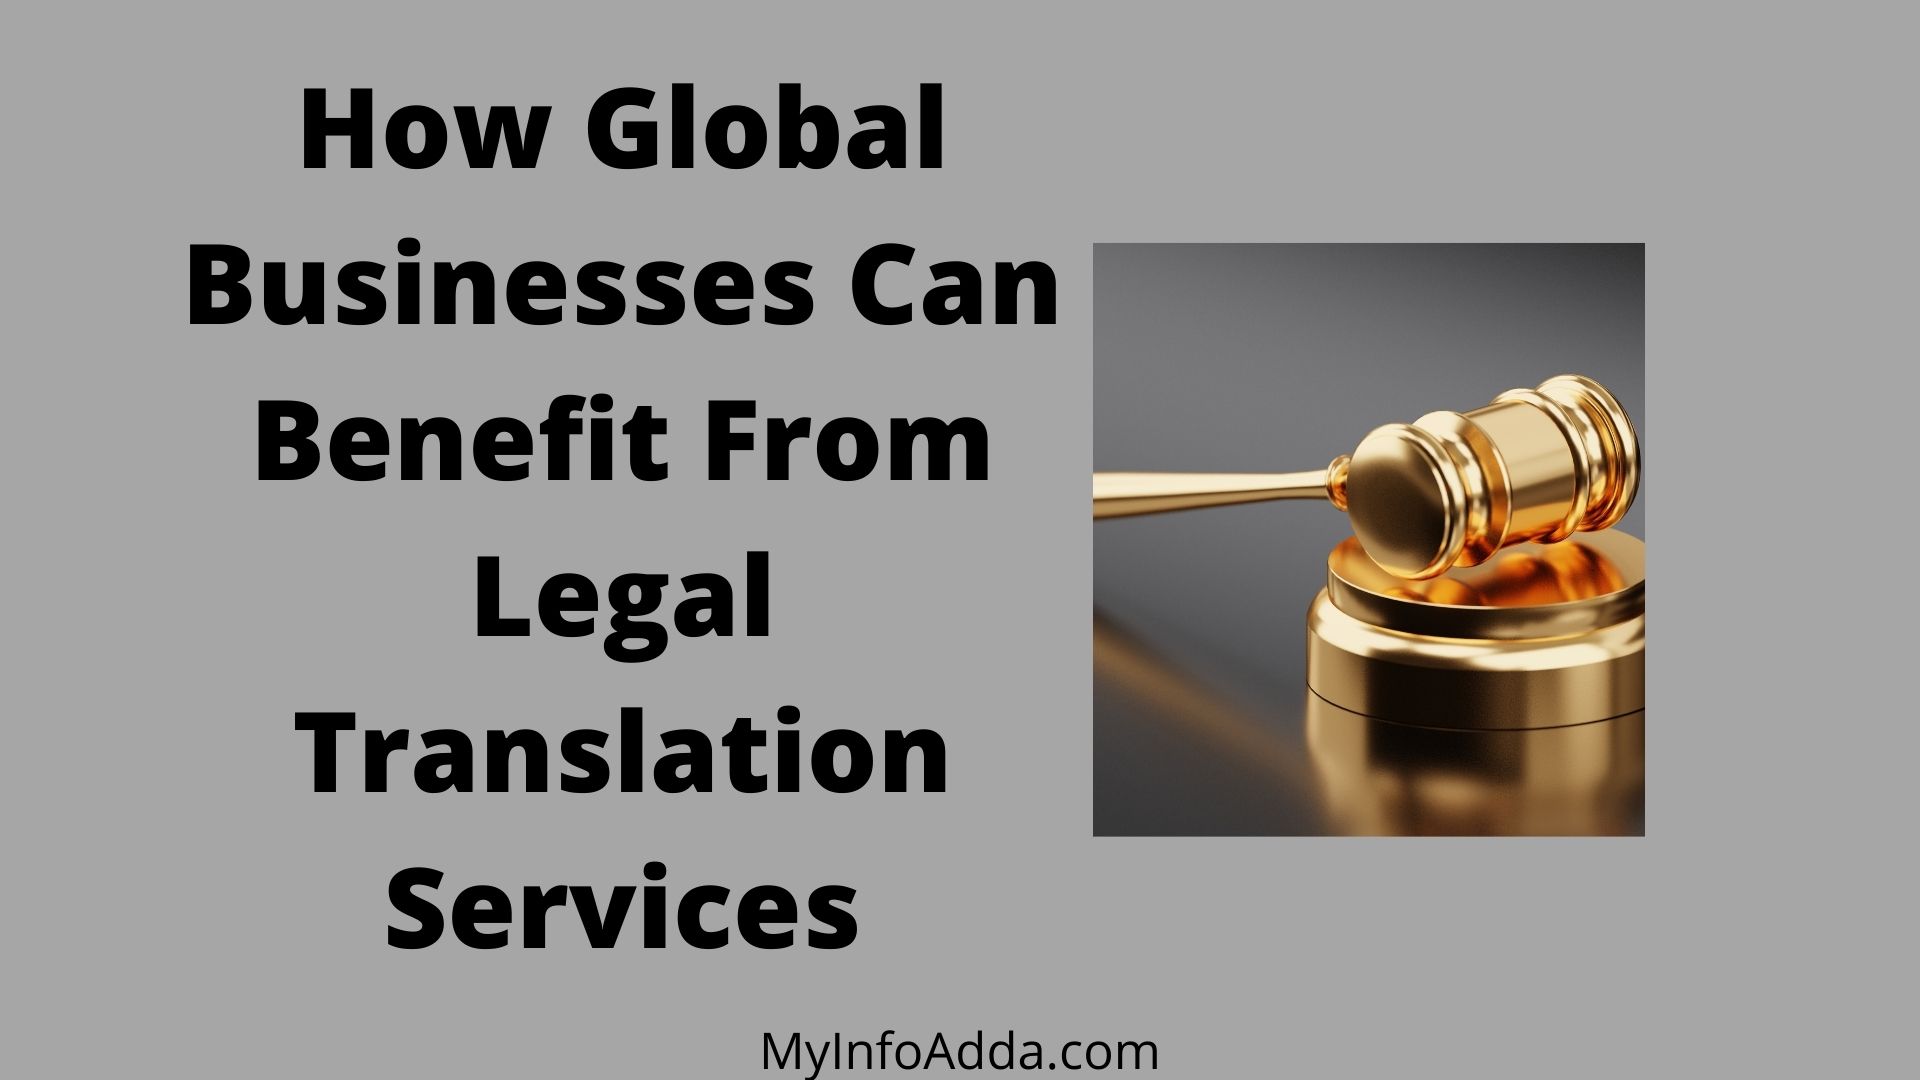 How Global Businesses Can Benefit from Legal Translation Services